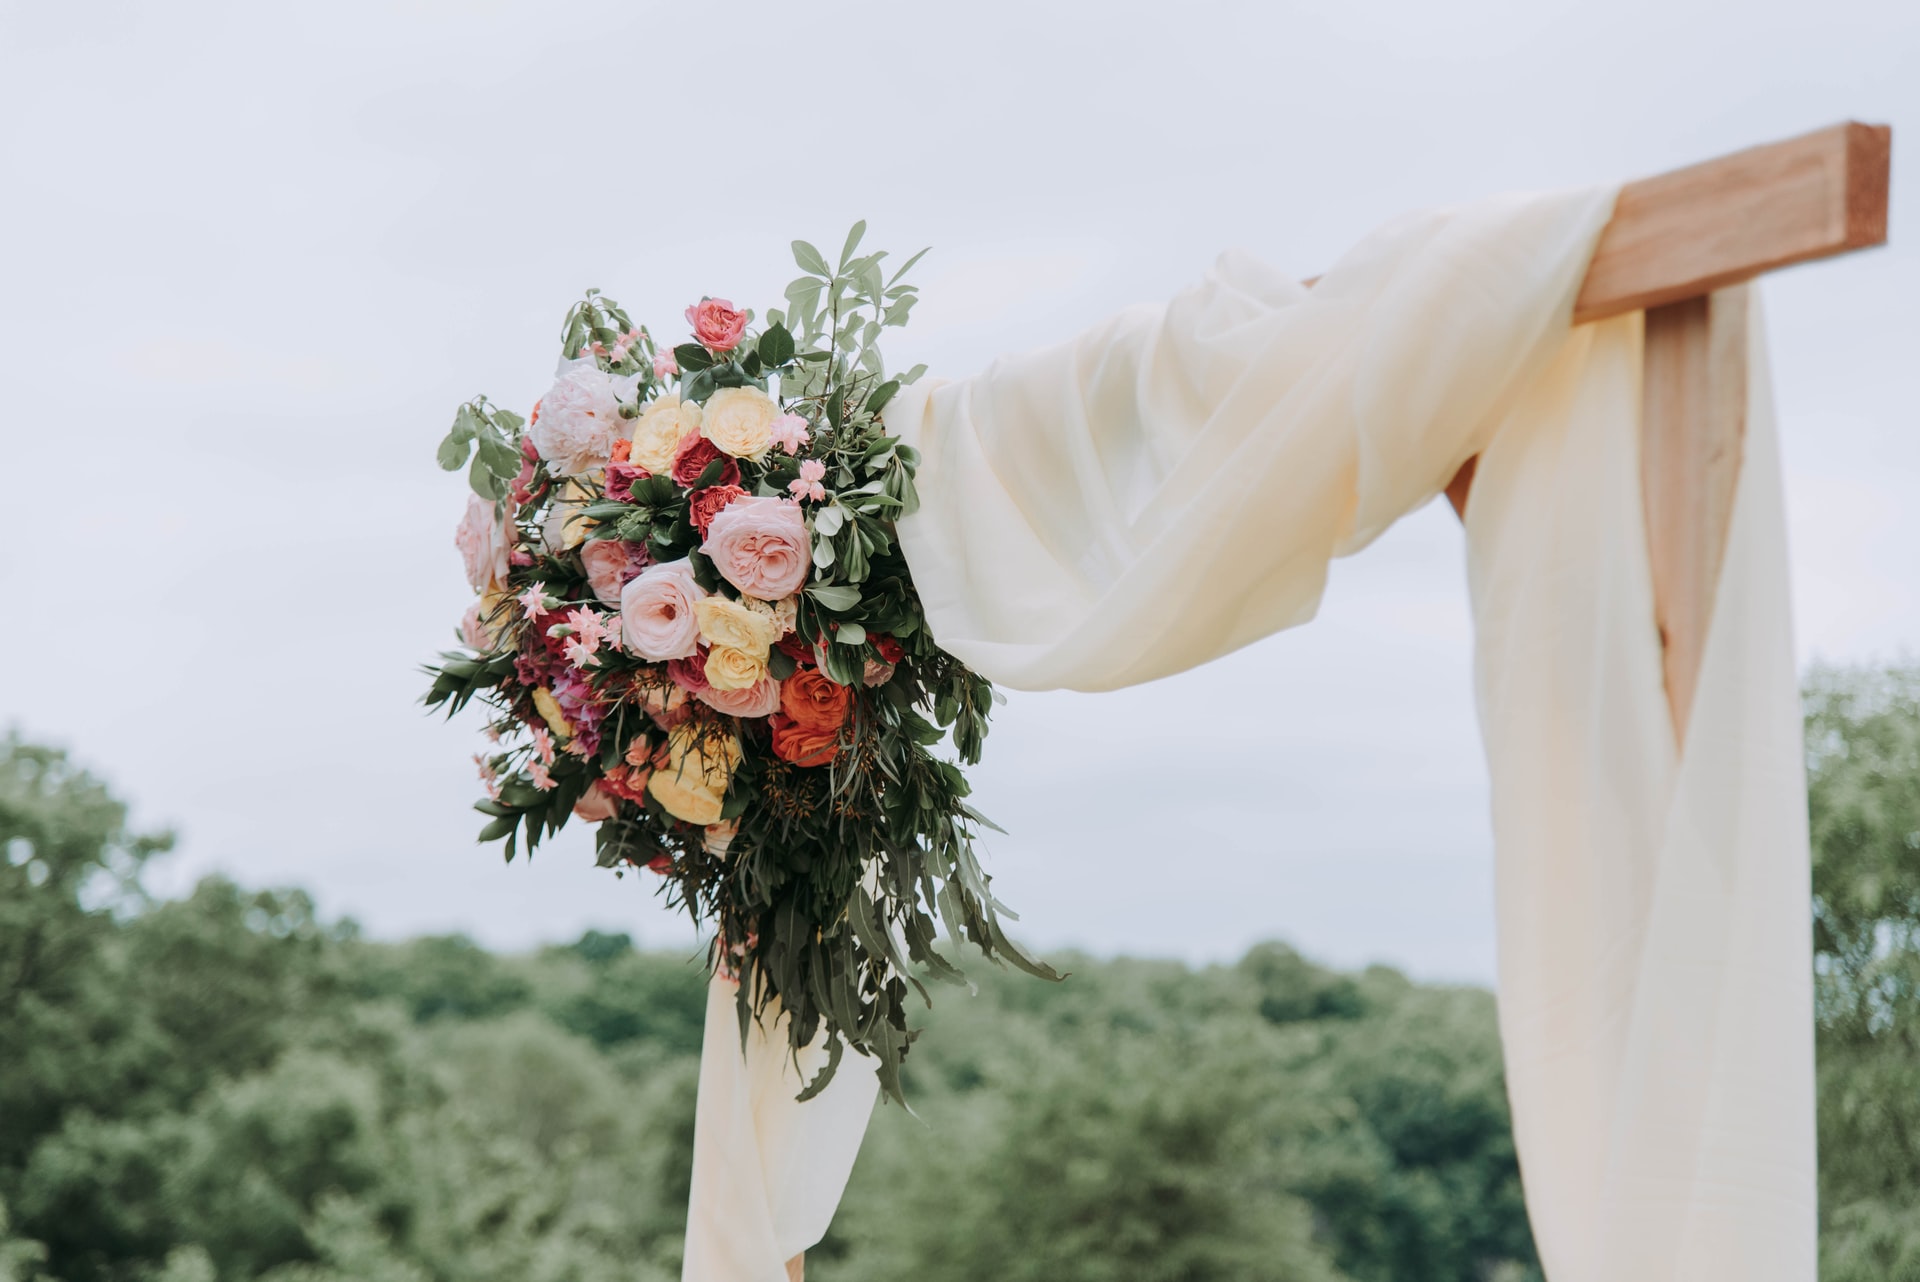 If you’re planning a destination wedding, you may be thinking about hiring local wedding vendors (i.e. vendors who are local to your chosen venue). Although I work internationally myself, I can recognise there are certain advantages to hiring people based locally. However, there are a few key questions you should ask before booking local vendors for your destination wedding.